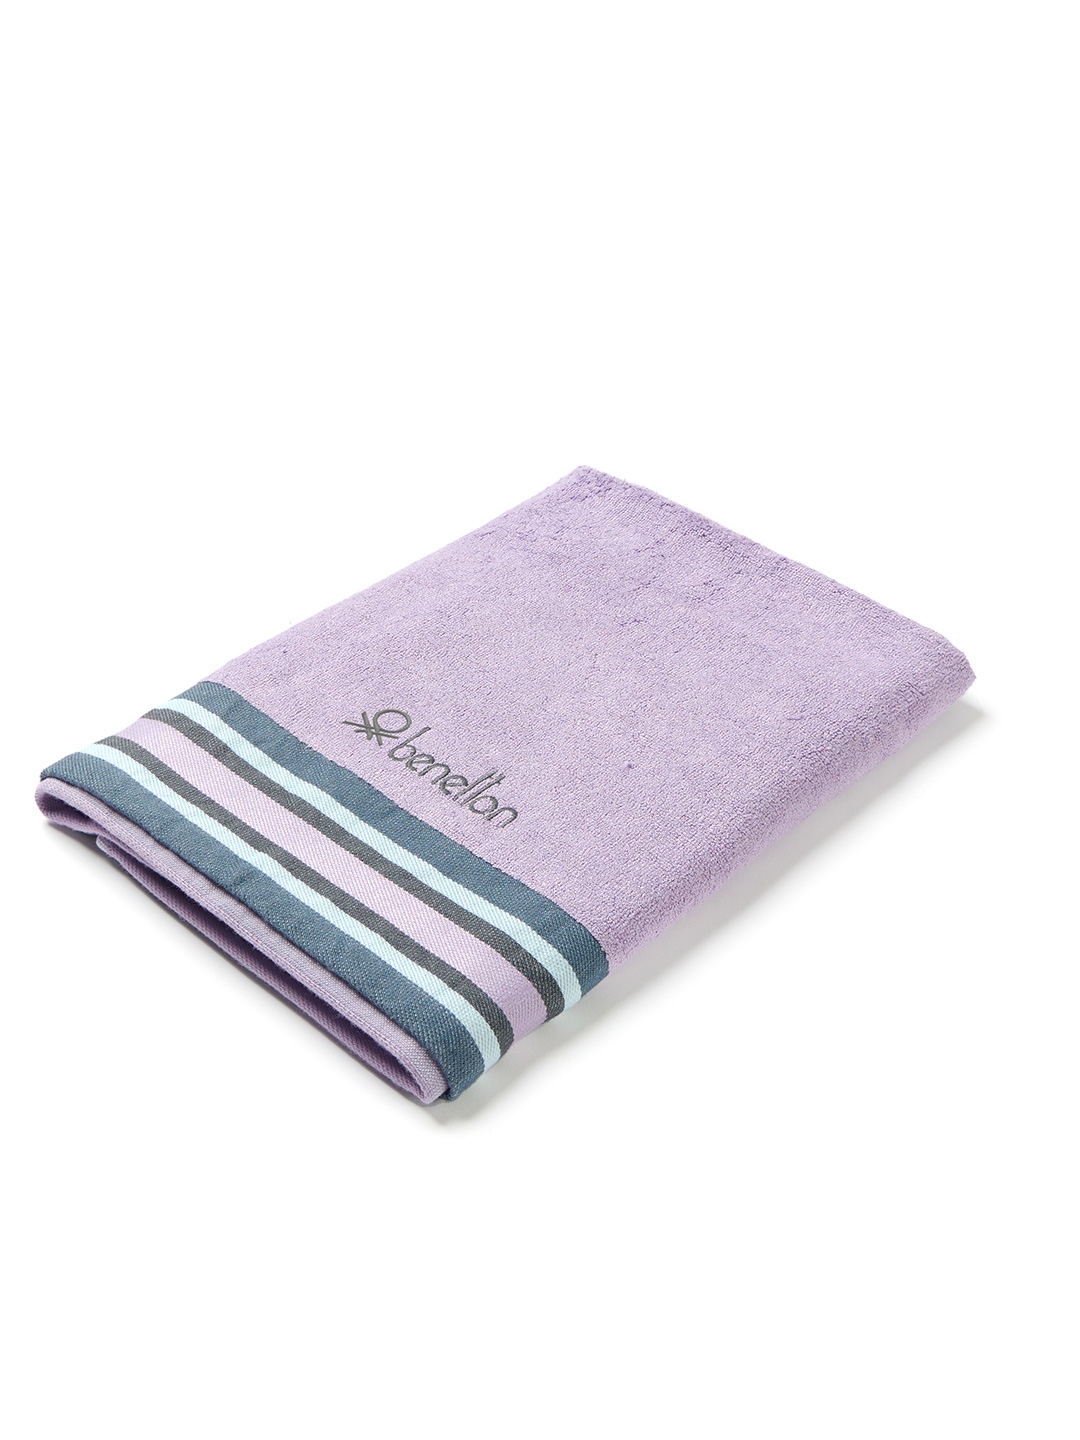 Buy United Colors Of Benetton Lavender Boutique Bamboo Bath Towel ...